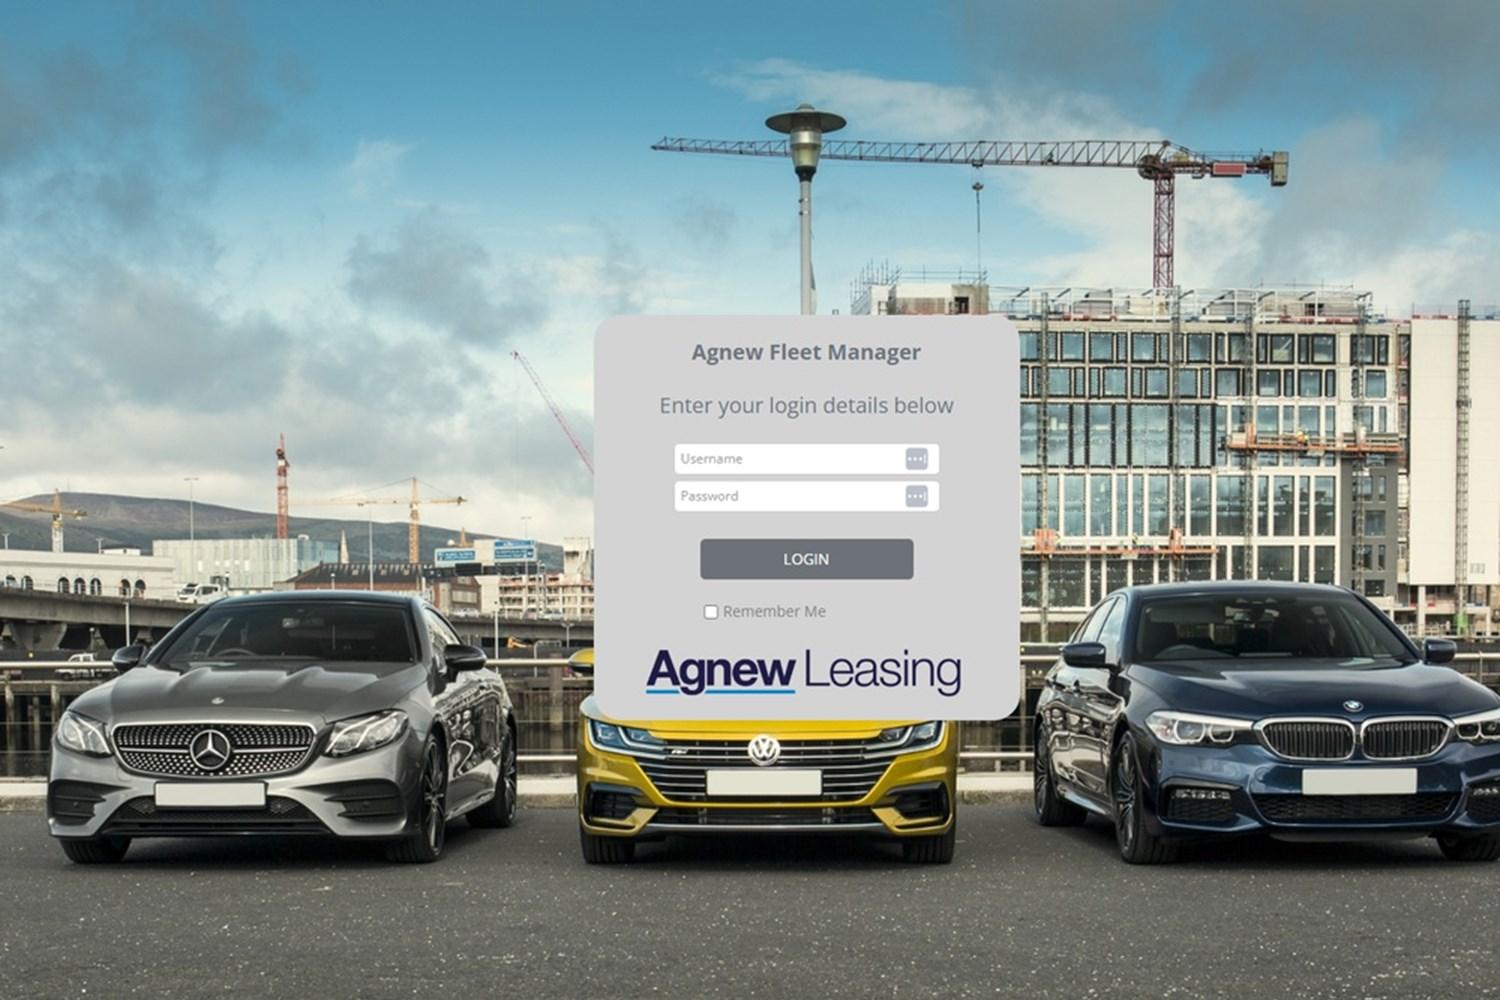 Display of the Agnew Leasing fleet management system available online